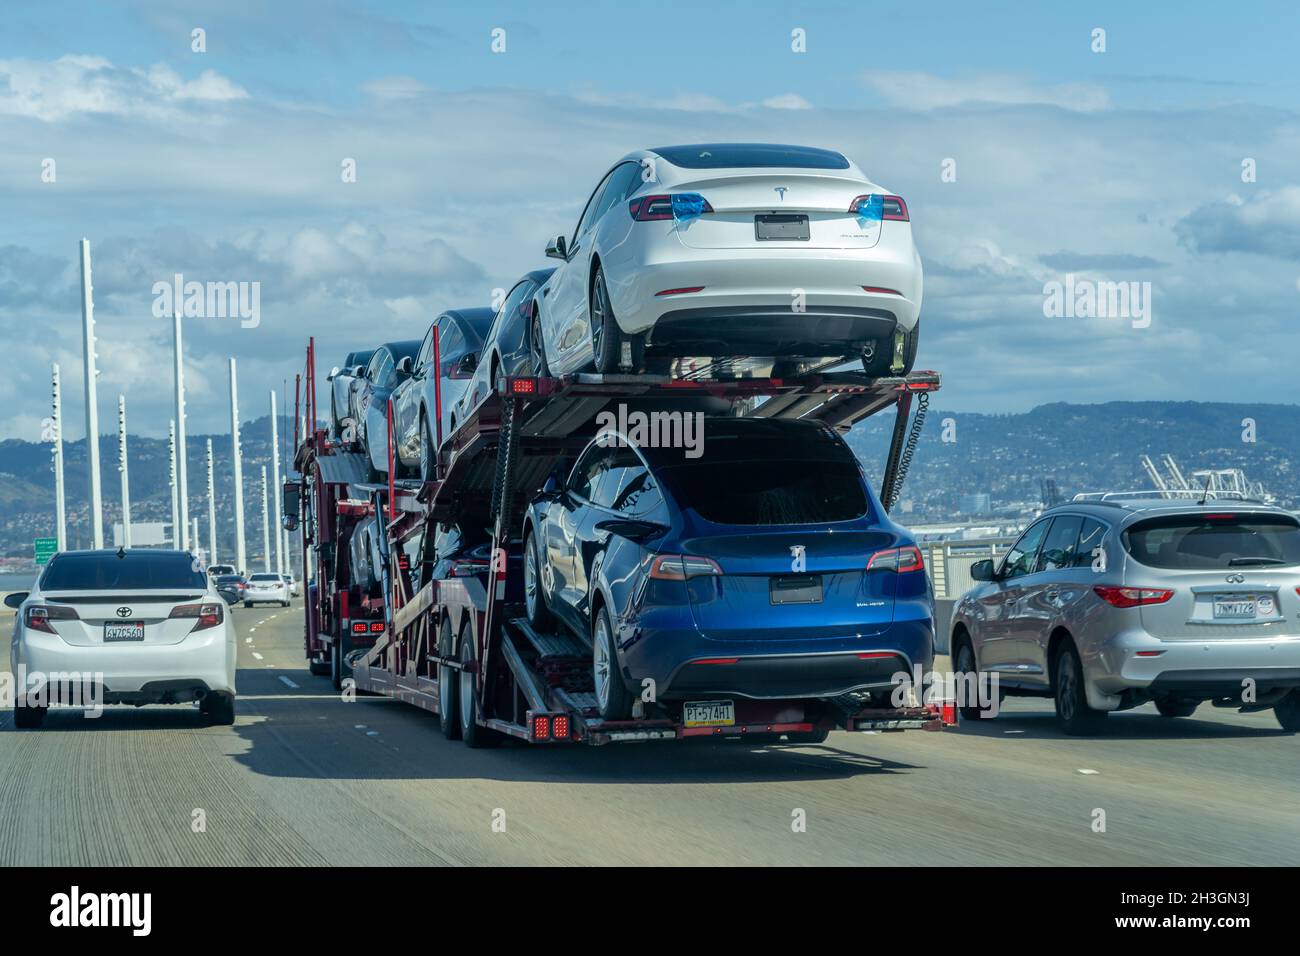 SAN FRANCISCO, UNITED STATES - Mar 19, 2021: New Tesla cars being transported from a factory on a car hauler on a San Francisco Bay Bridge Stock Photo